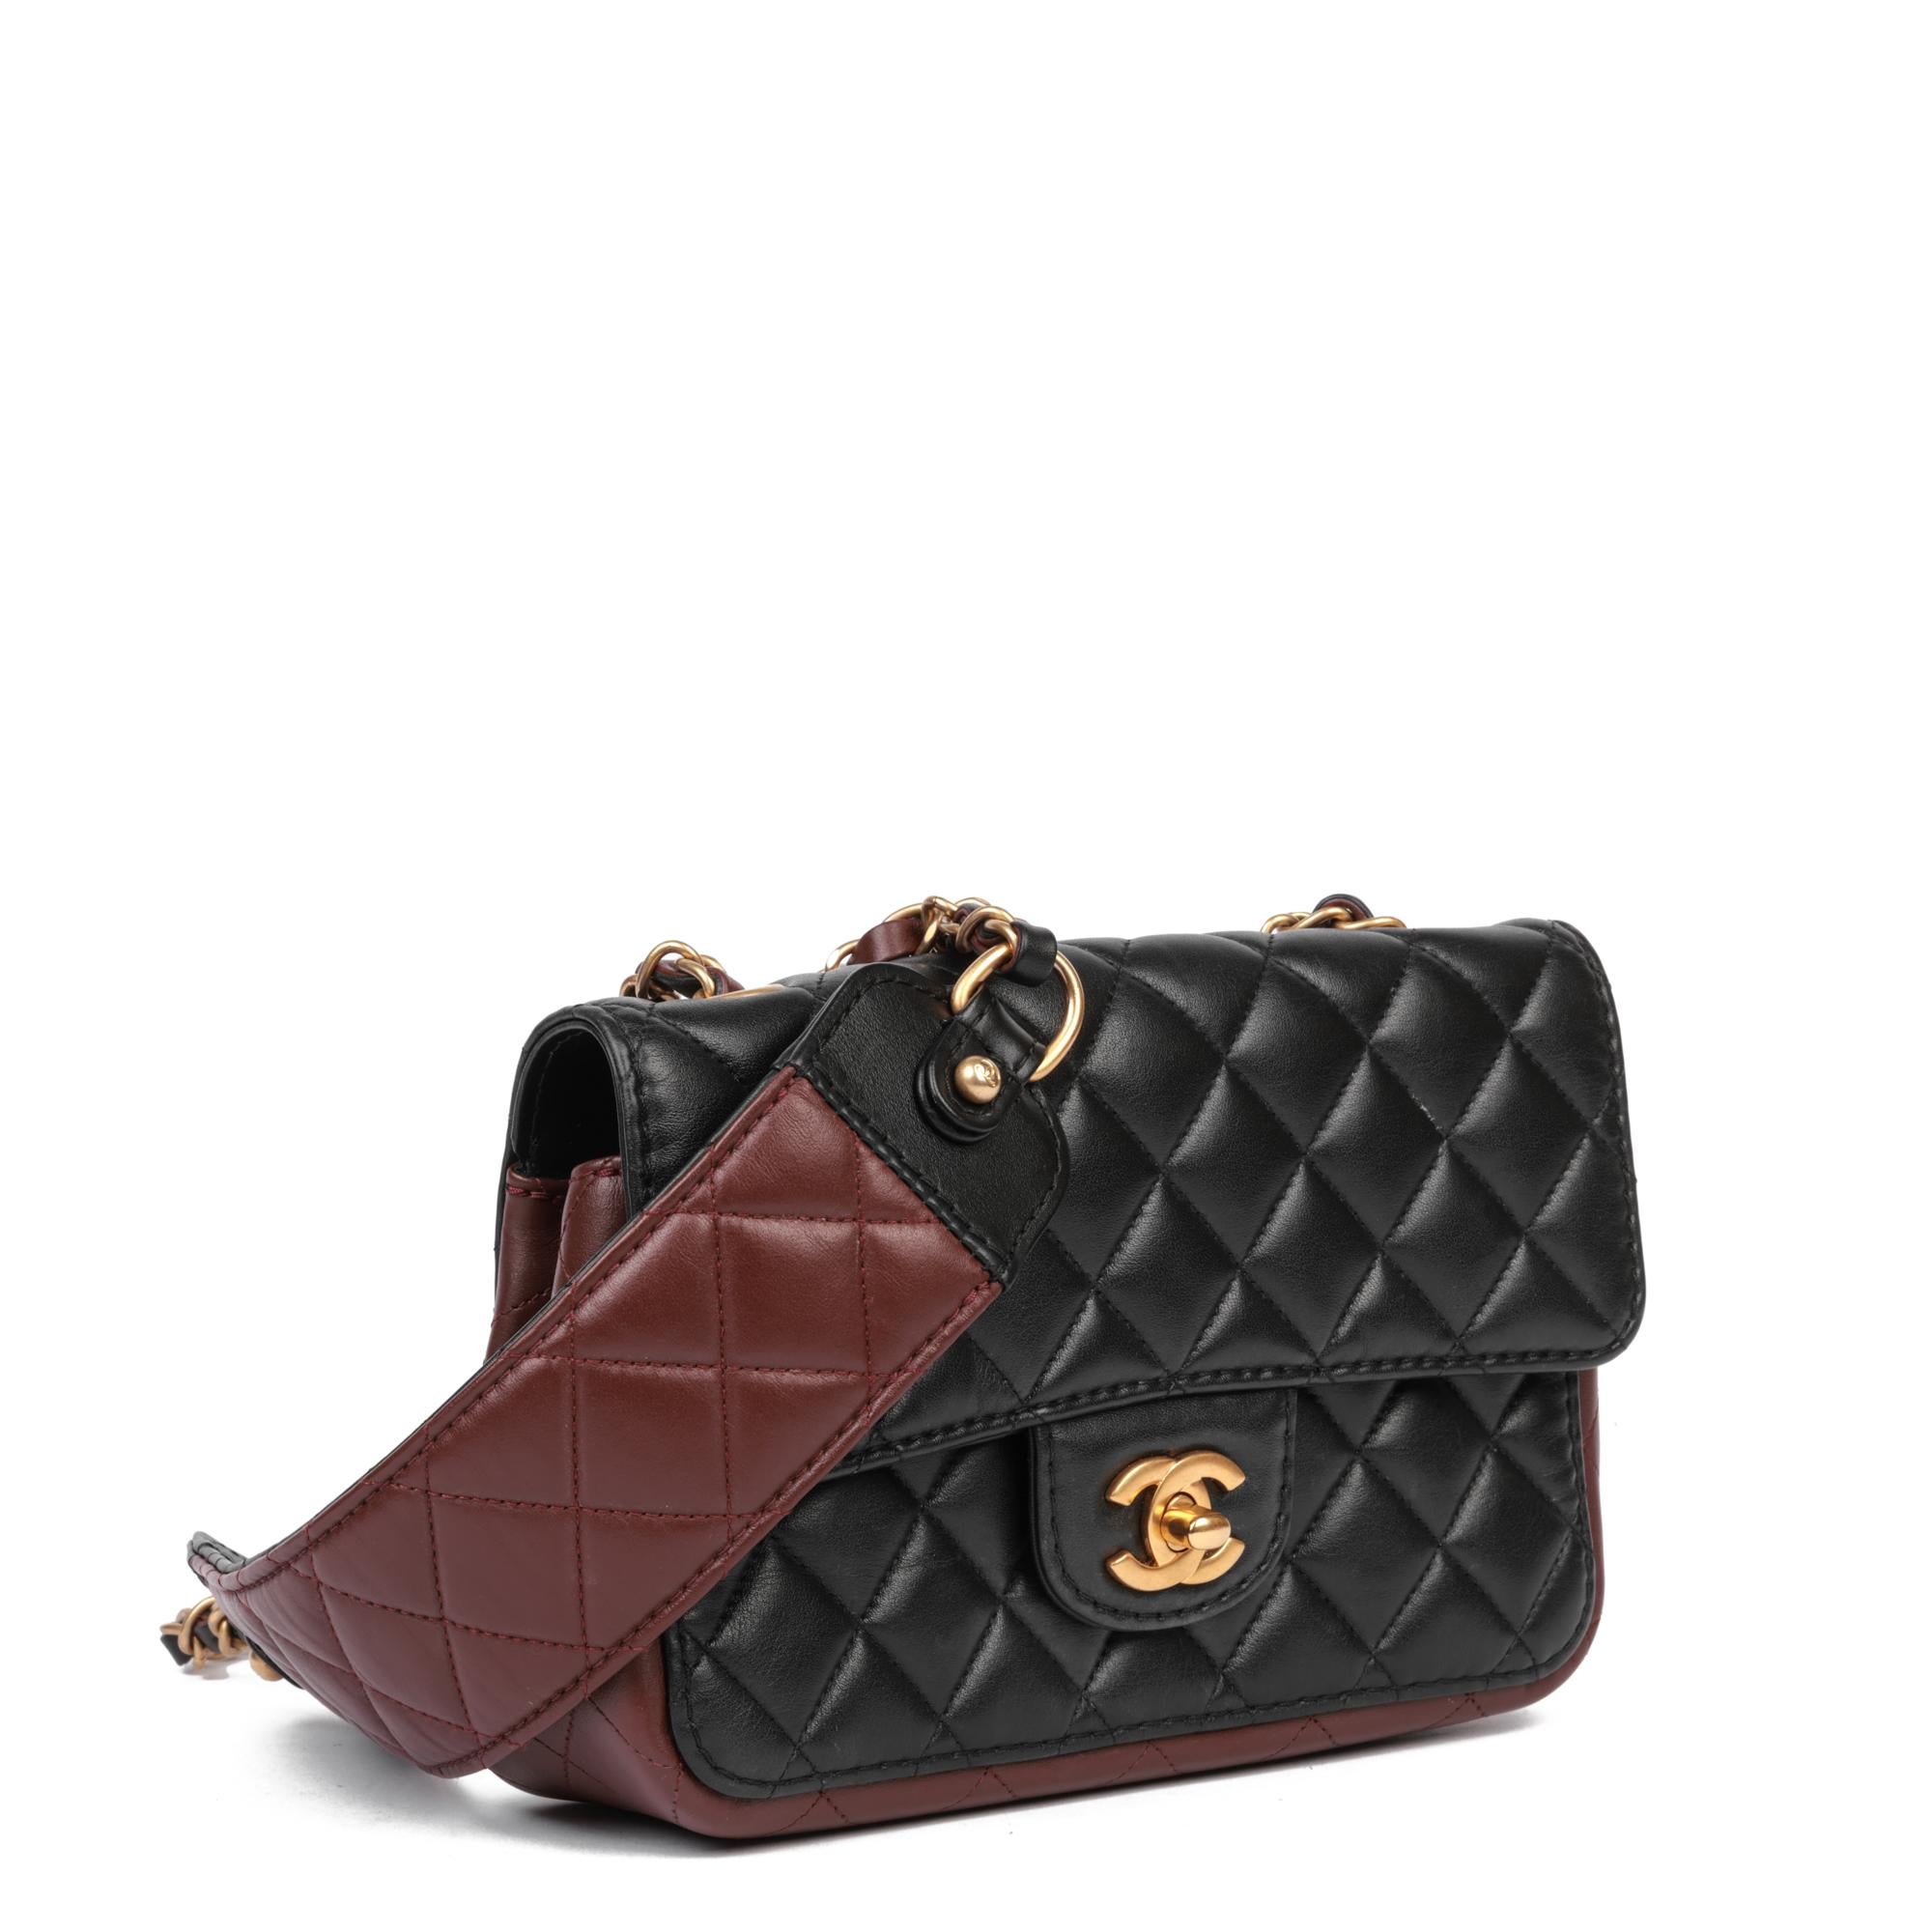 CHANEL
Black & Burgundy Quilted Lambskin Small Classic Single Flap Bag

Serial Number: 30456648
Age (Circa): 2020
Accompanied By: Chanel Dust Bag, Authenticity Card
Authenticity Details: Authenticity Card, Serial Sticker (Made in France)
Gender: